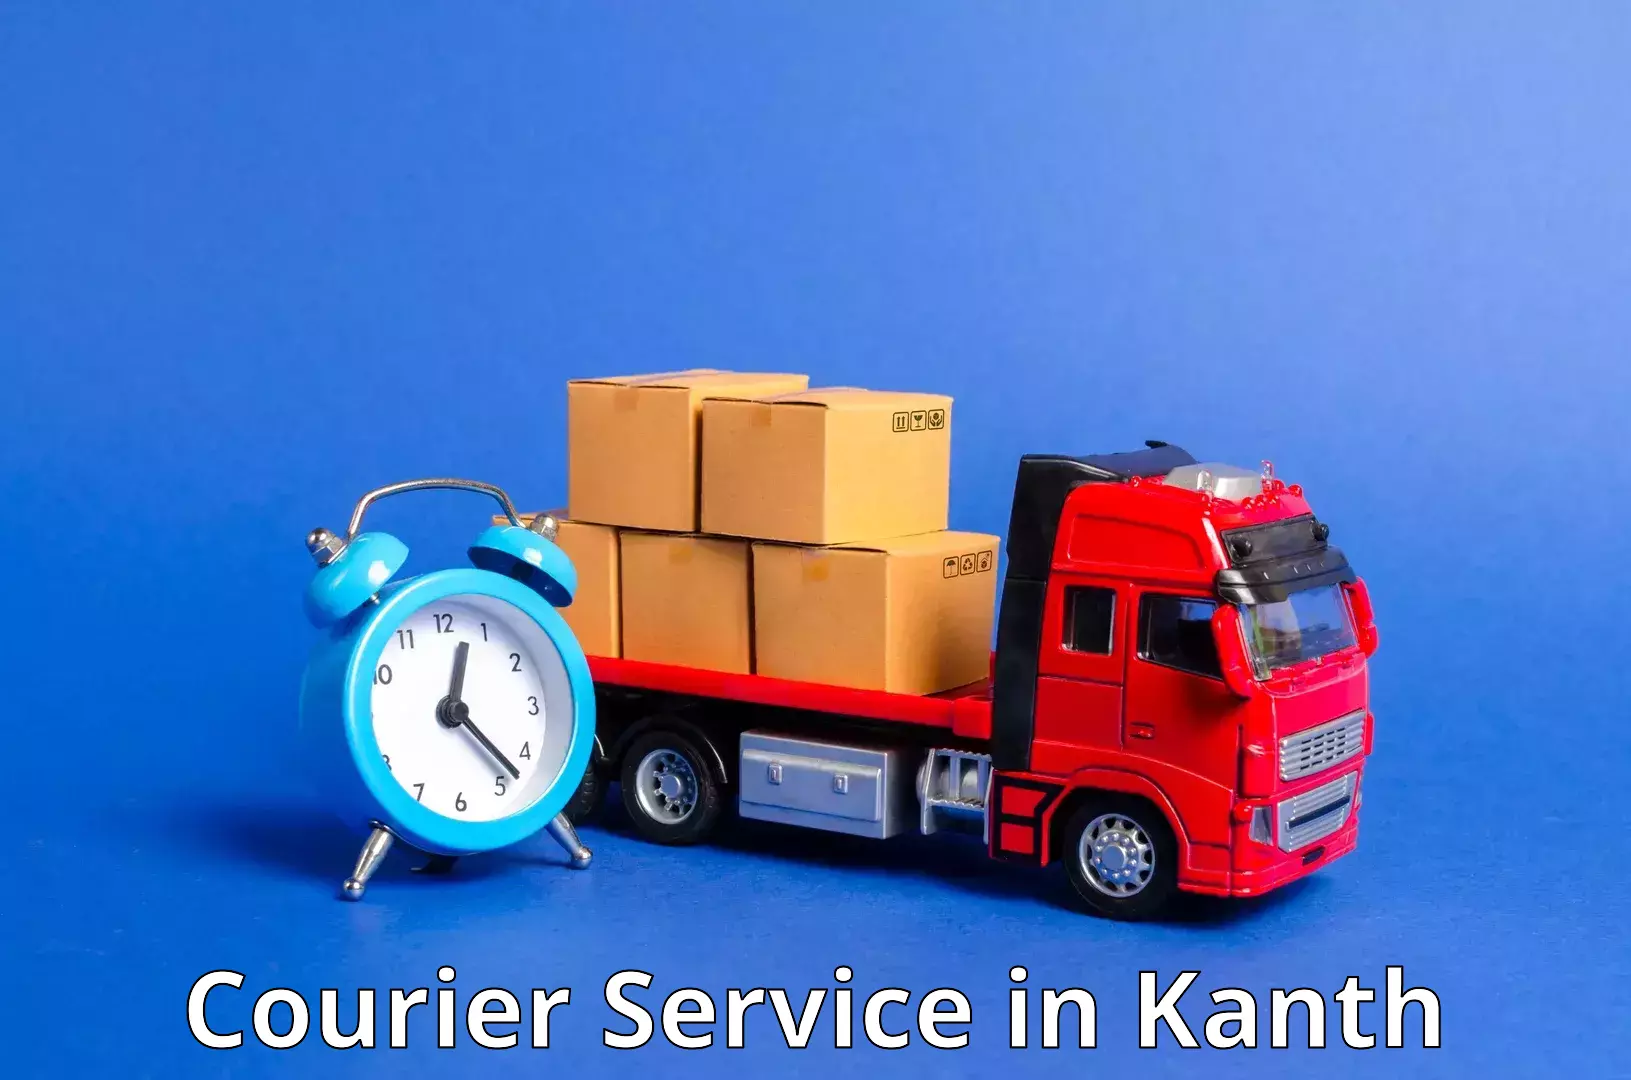 Next-generation courier services in Kanth